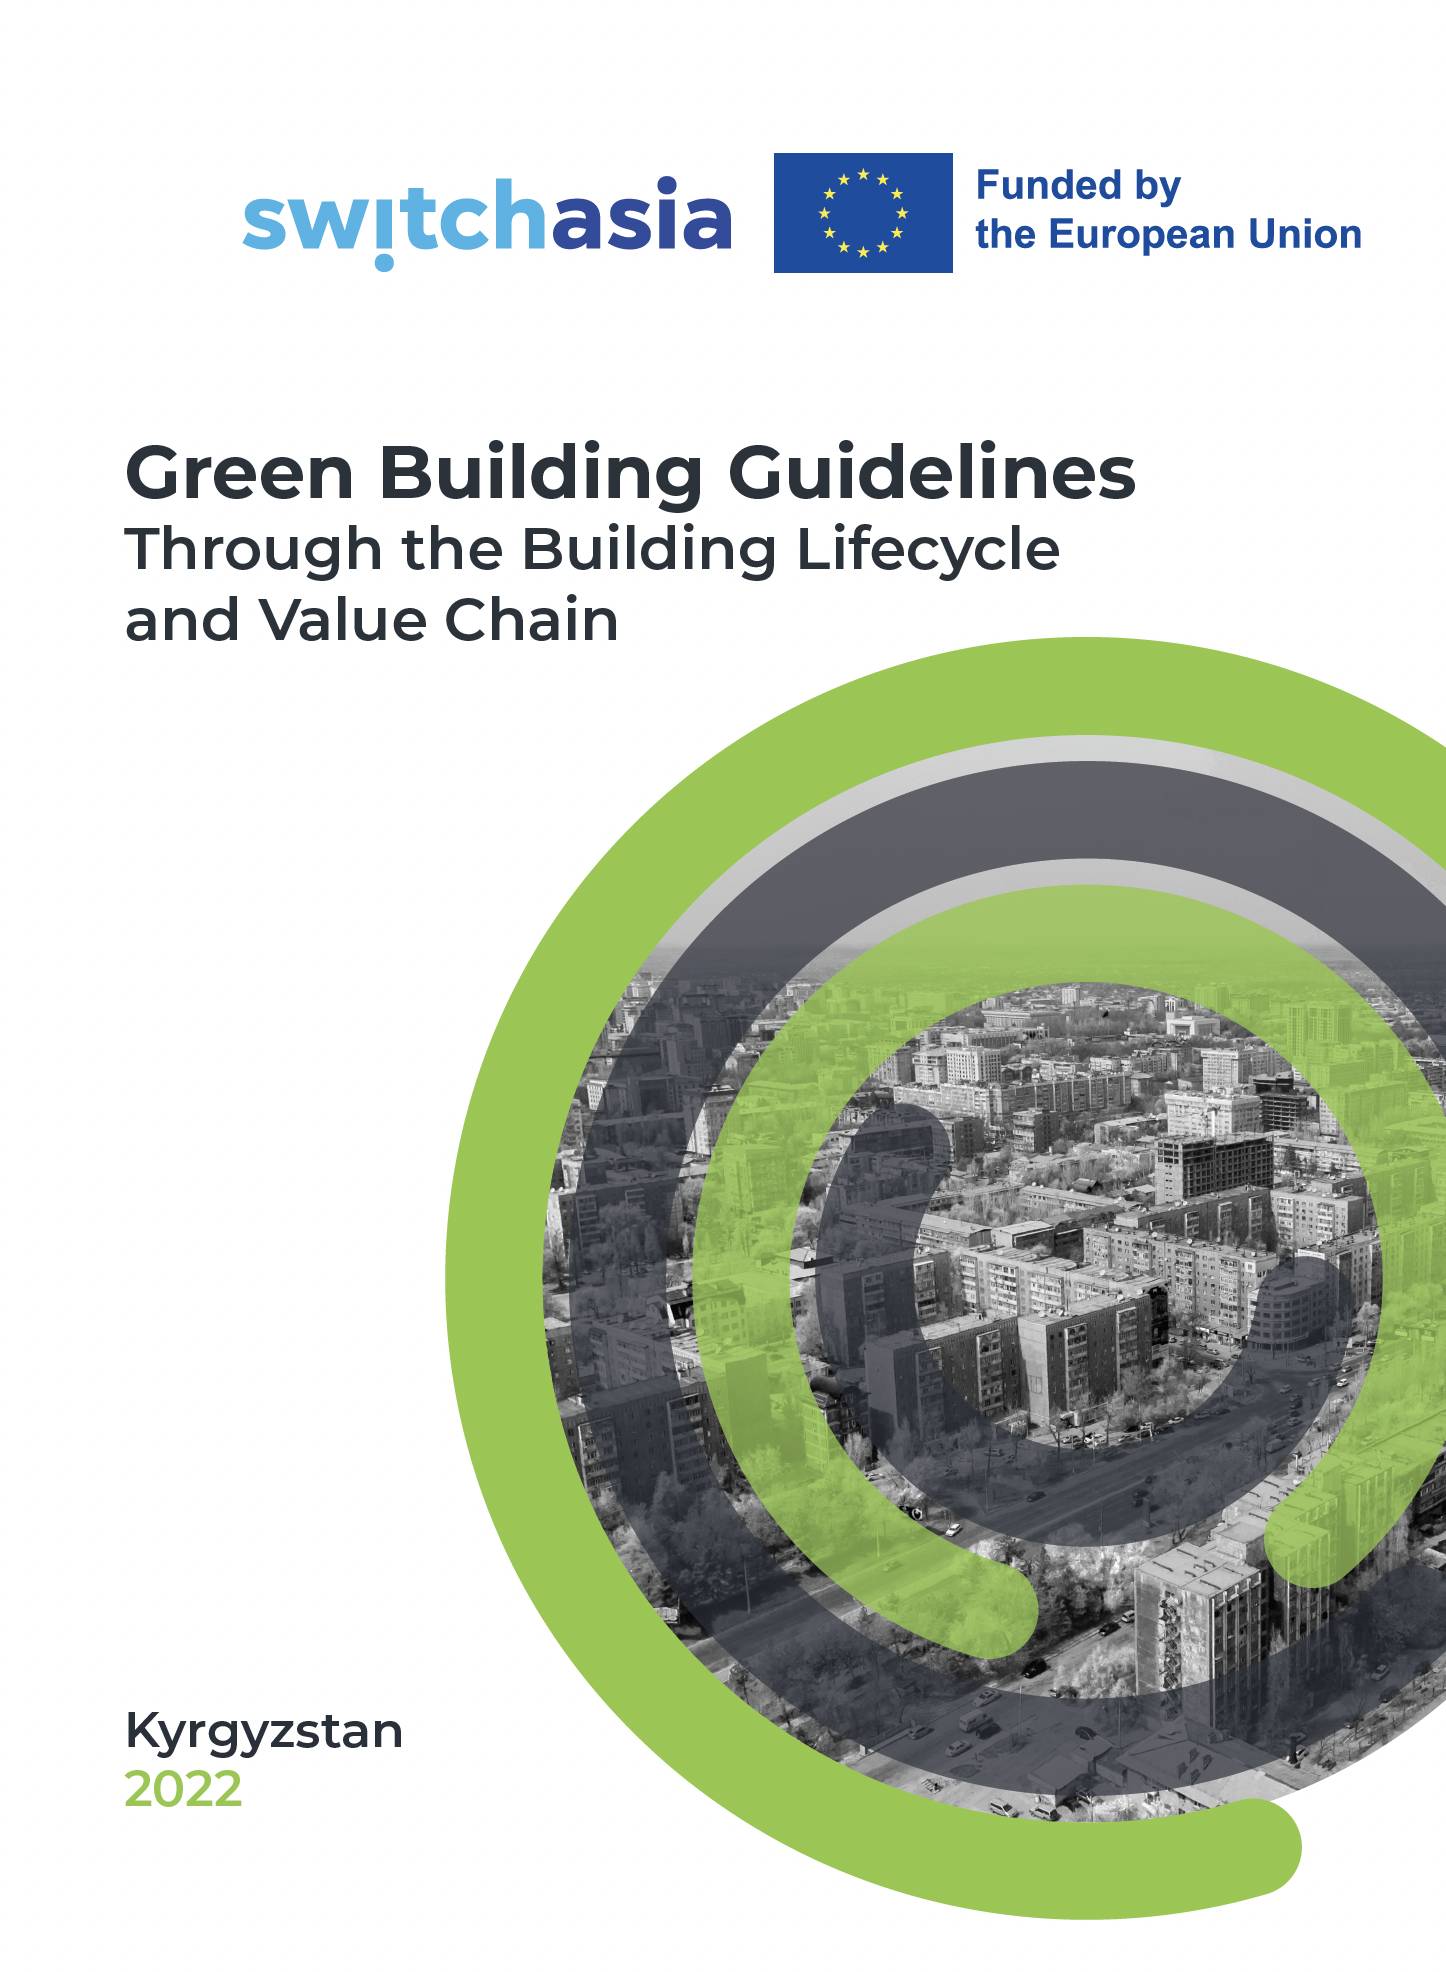 Green Building Guidelines Through the Building Lifecycle and Value Chain